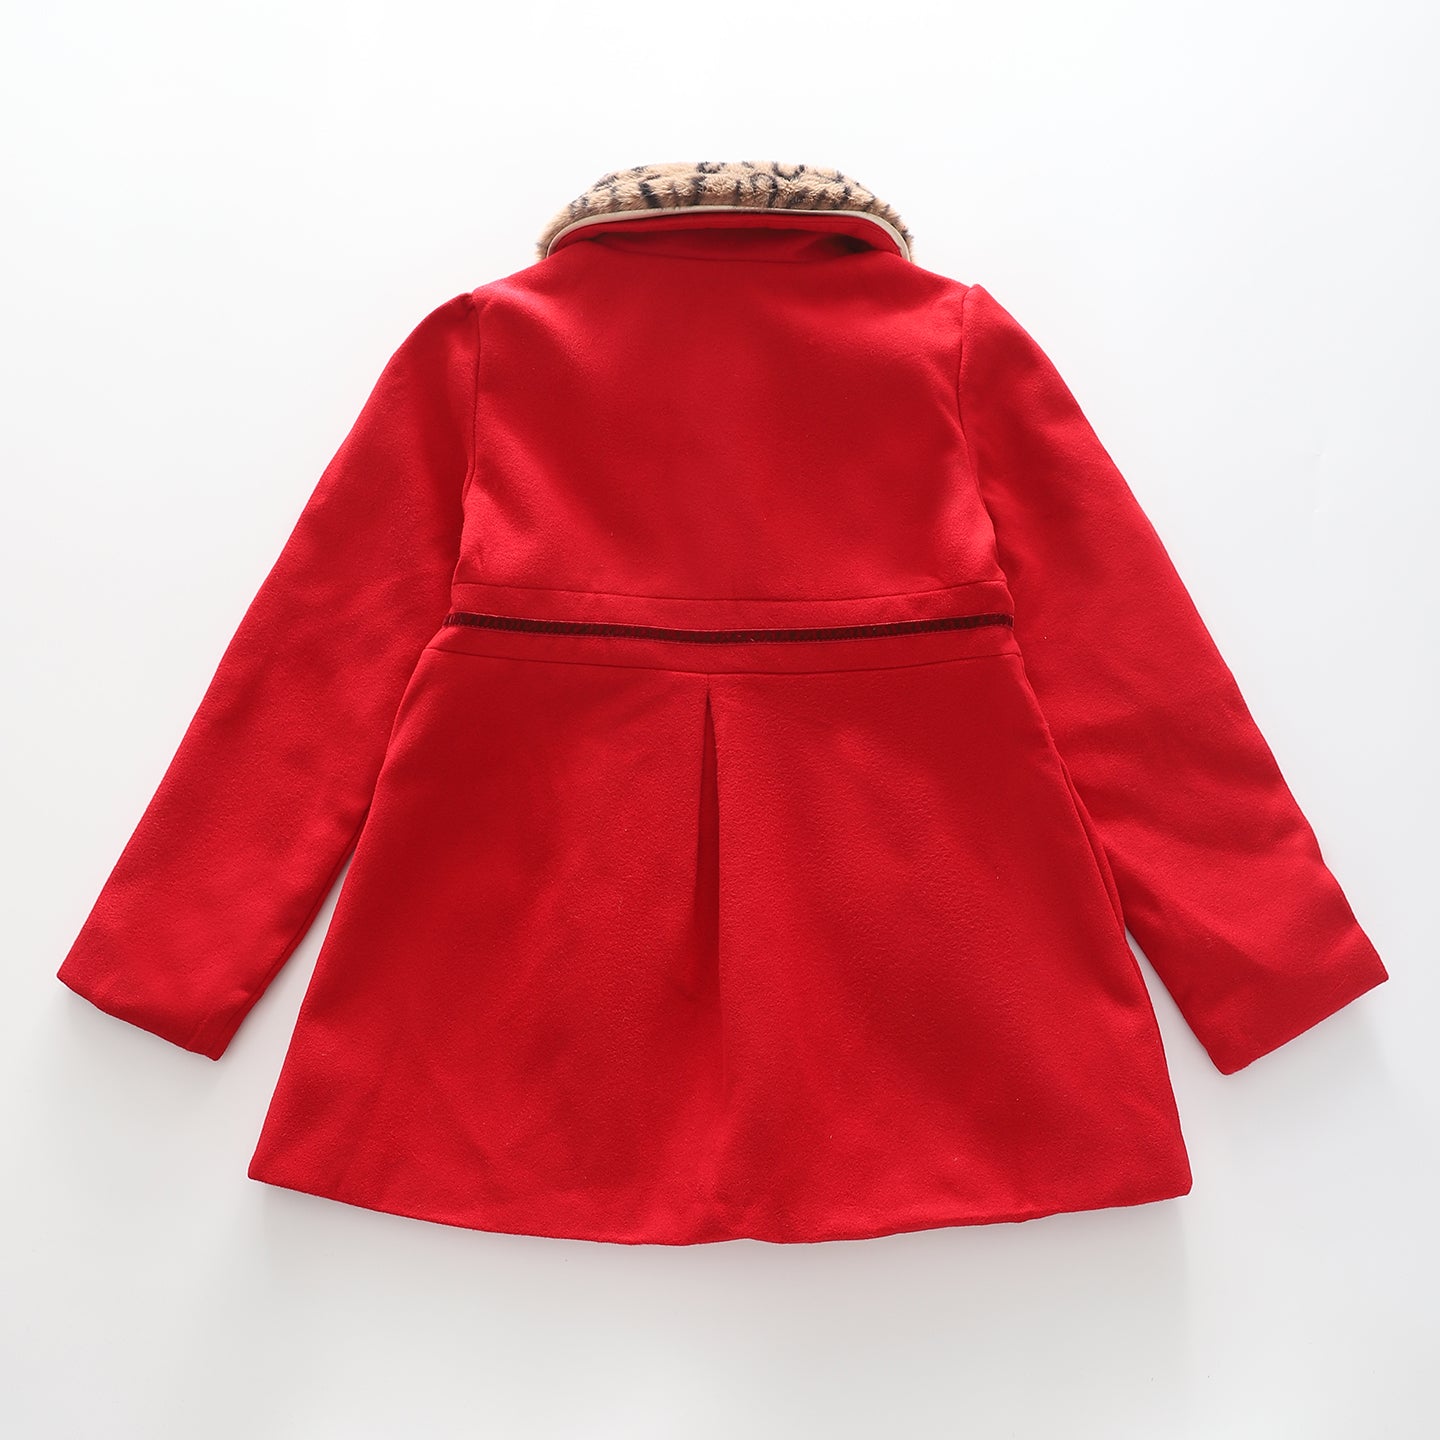 Older Girls' Red Winter Coat with Detachable Faux Fur Collar